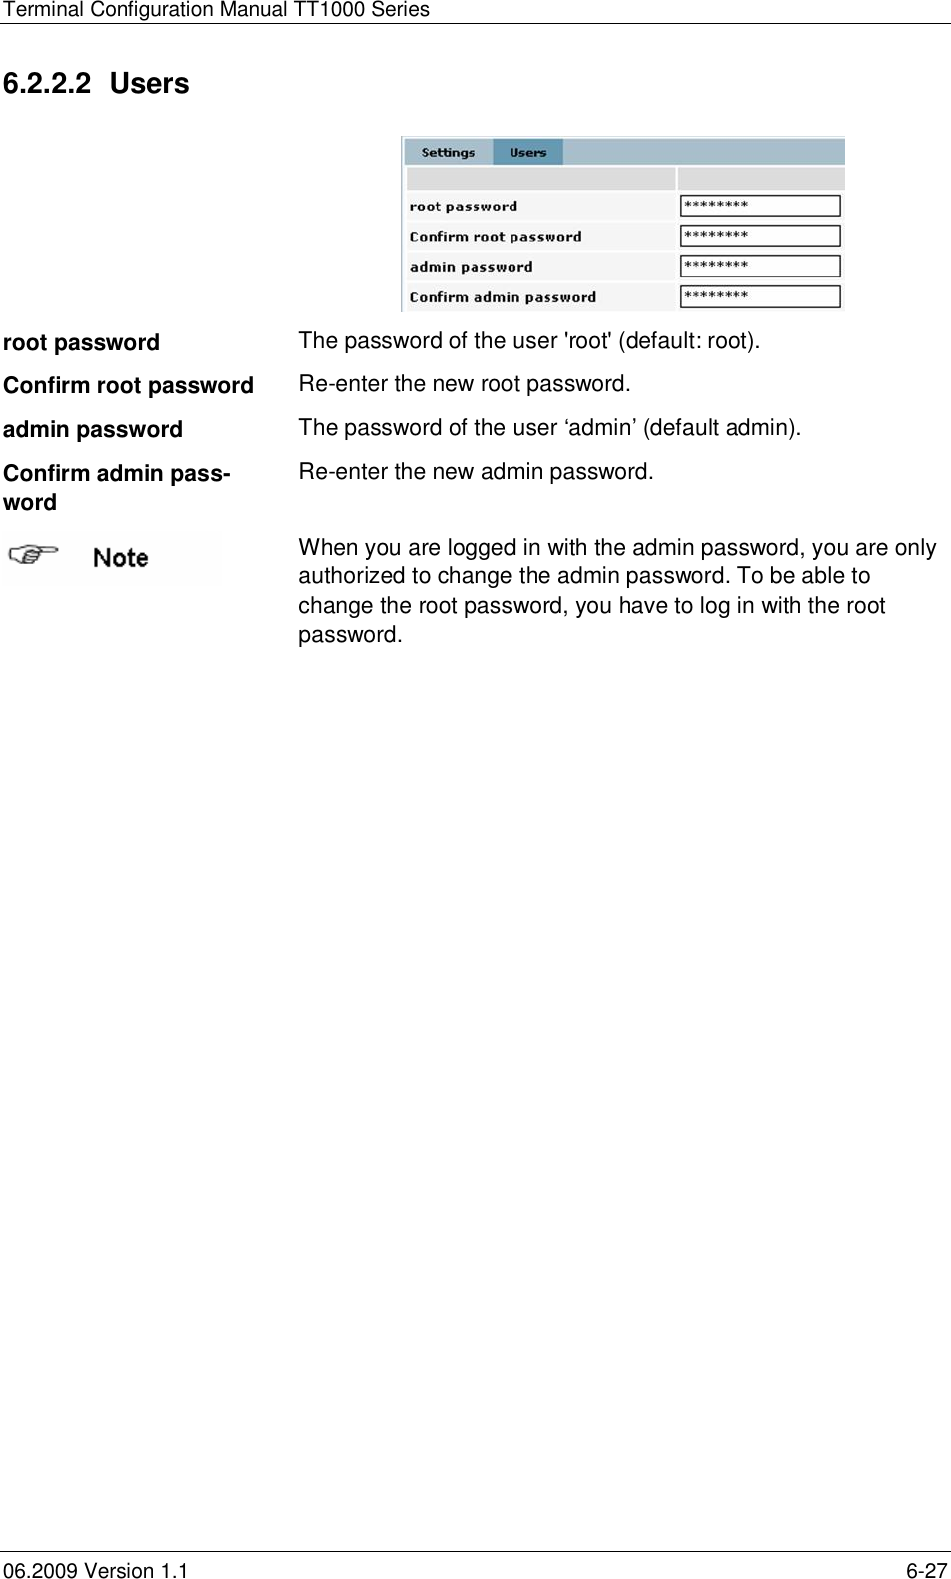 Terminal Configuration Manual TT1000 Series06.2009 Version 1.1 6-276.2.2.2 Usersroot password The password of the user &apos;root&apos; (default: root).Confirm root password Re-enter the new root password.admin password The password of the user ‘admin’ (default admin).Confirm admin pass-wordRe-enter the new admin password.When you are logged in with the admin password, you are onlyauthorized to change the admin password. To be able tochange the root password, you have to log in with the rootpassword.